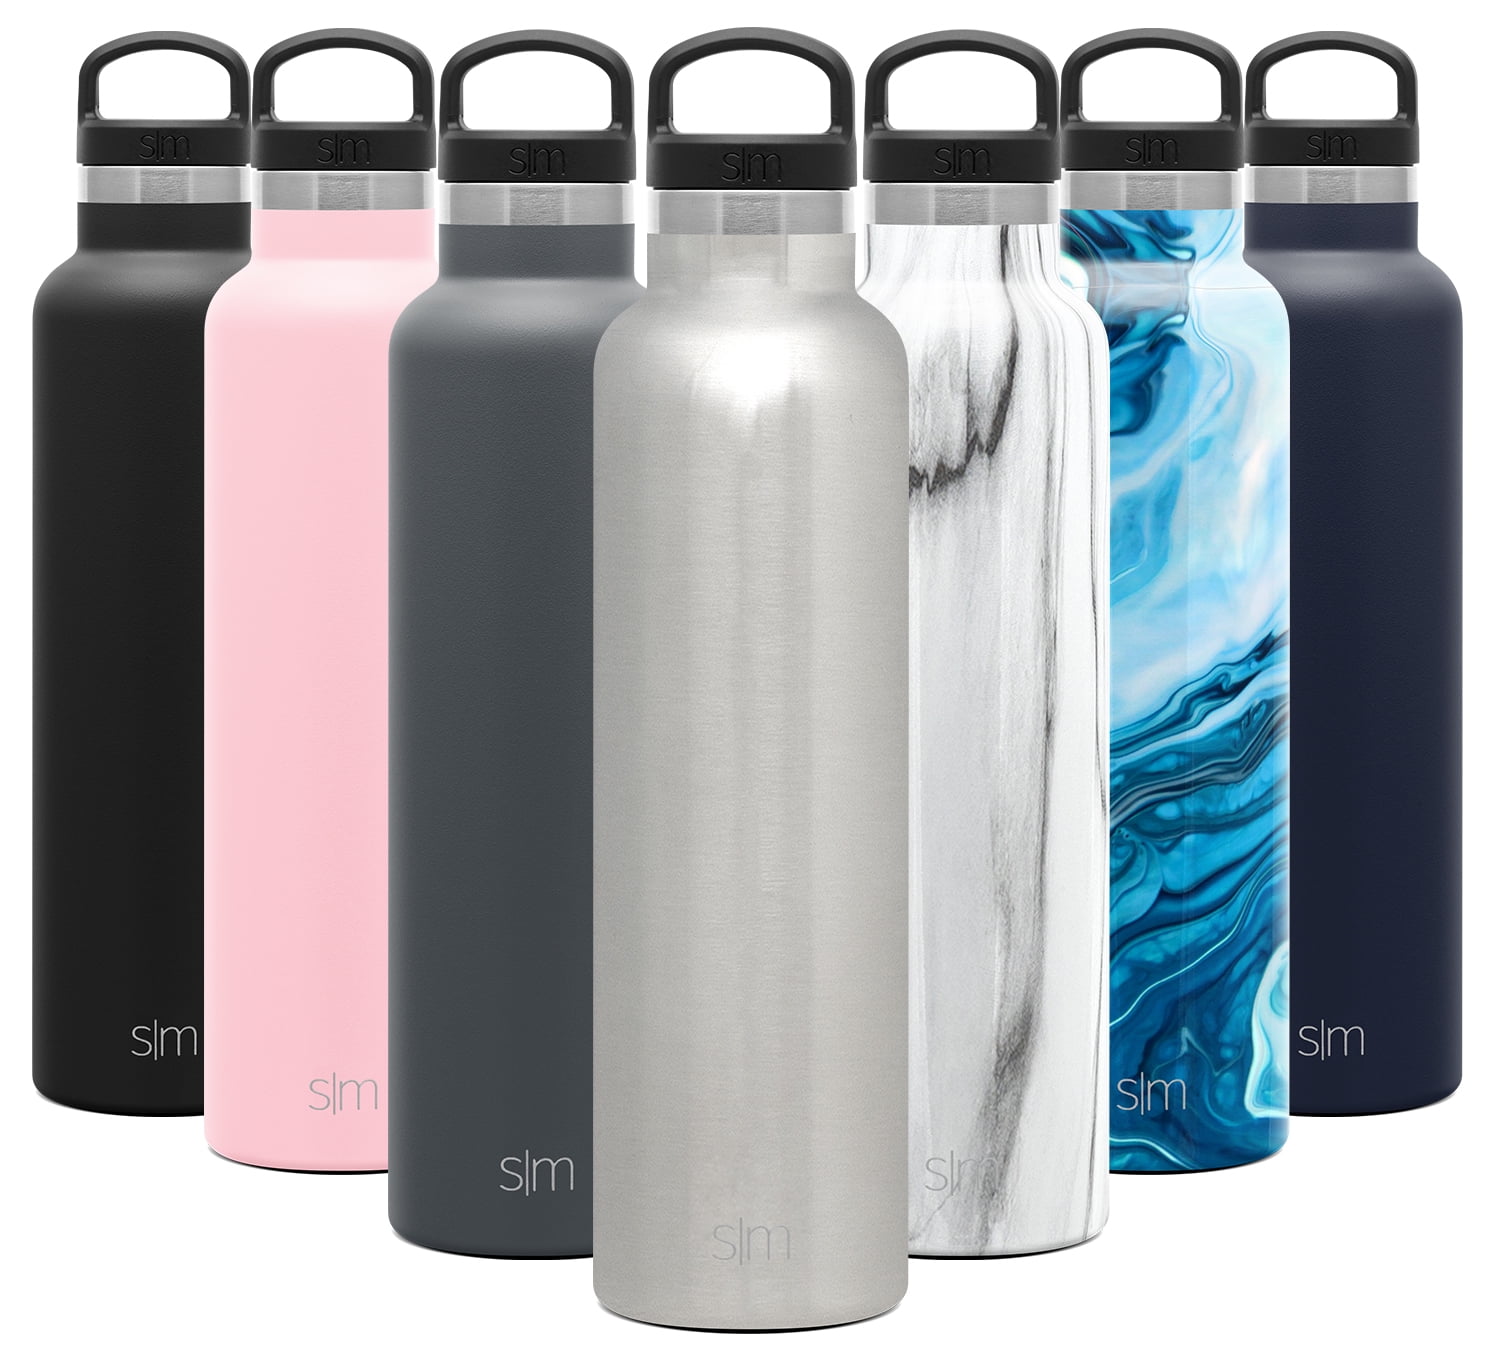 BOTTLE BOTTLE 24oz Insulated Water Bottle Stainless Steel Sport Water  Bottle with Straw and Adjustab…See more BOTTLE BOTTLE 24oz Insulated Water